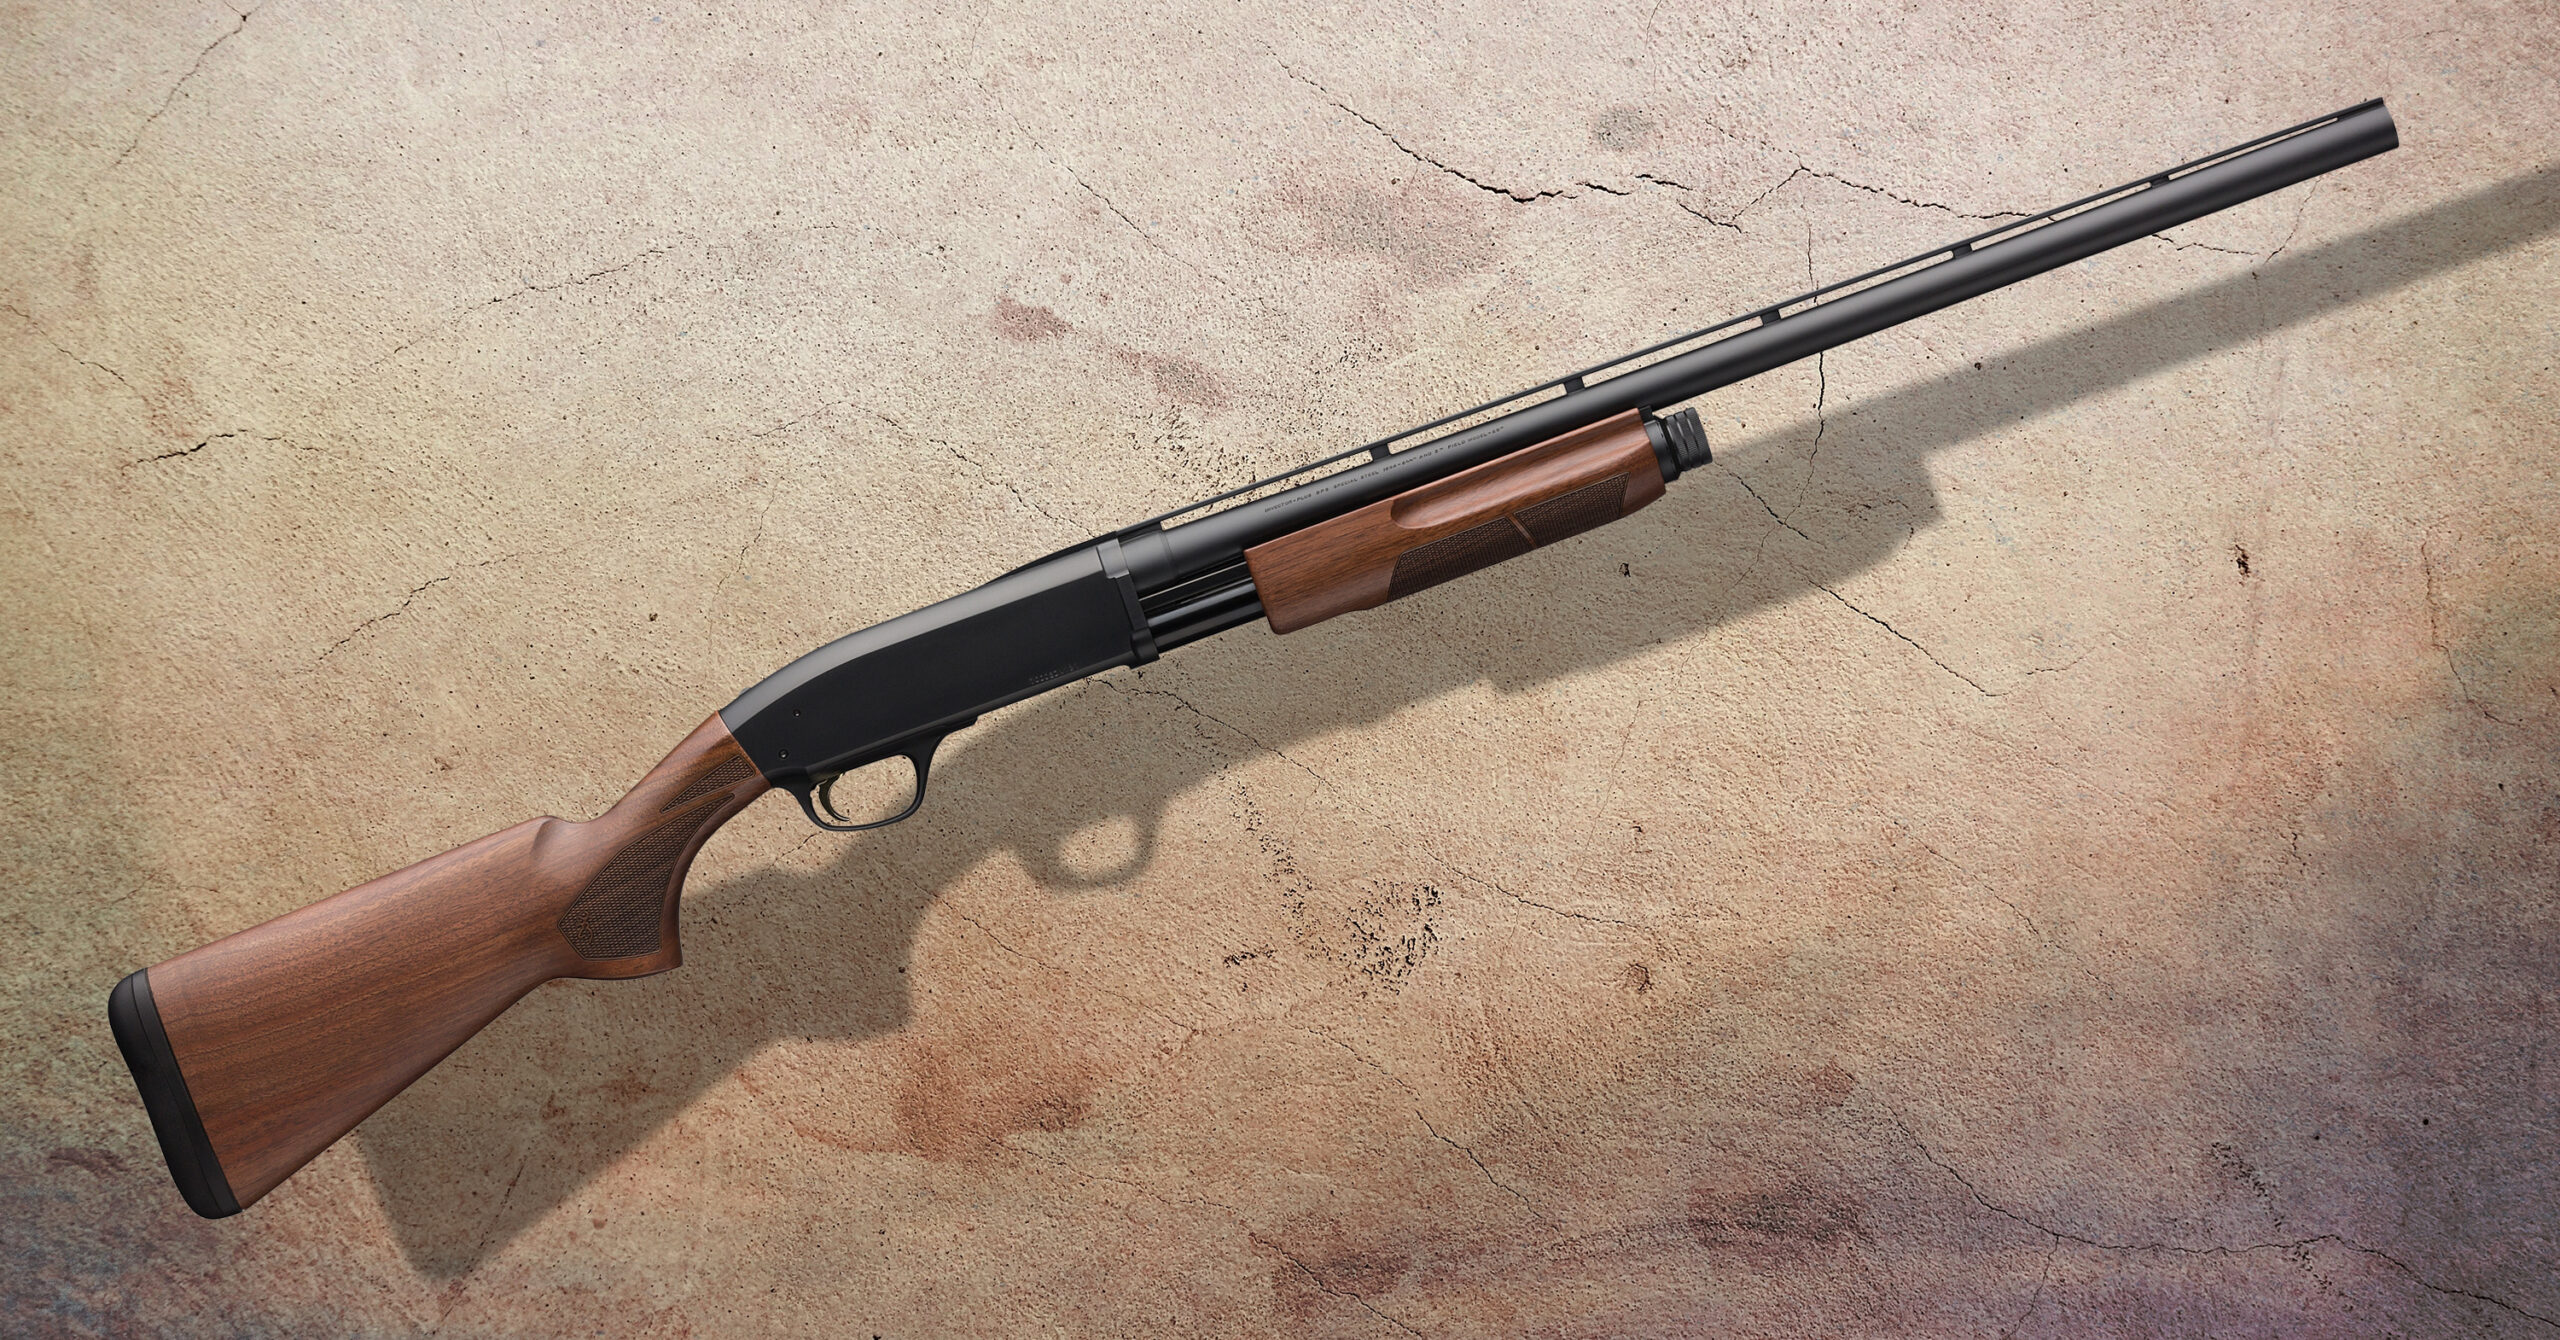 The .410 pump shotgun from Browning is a fine choice for a small-bore pump.